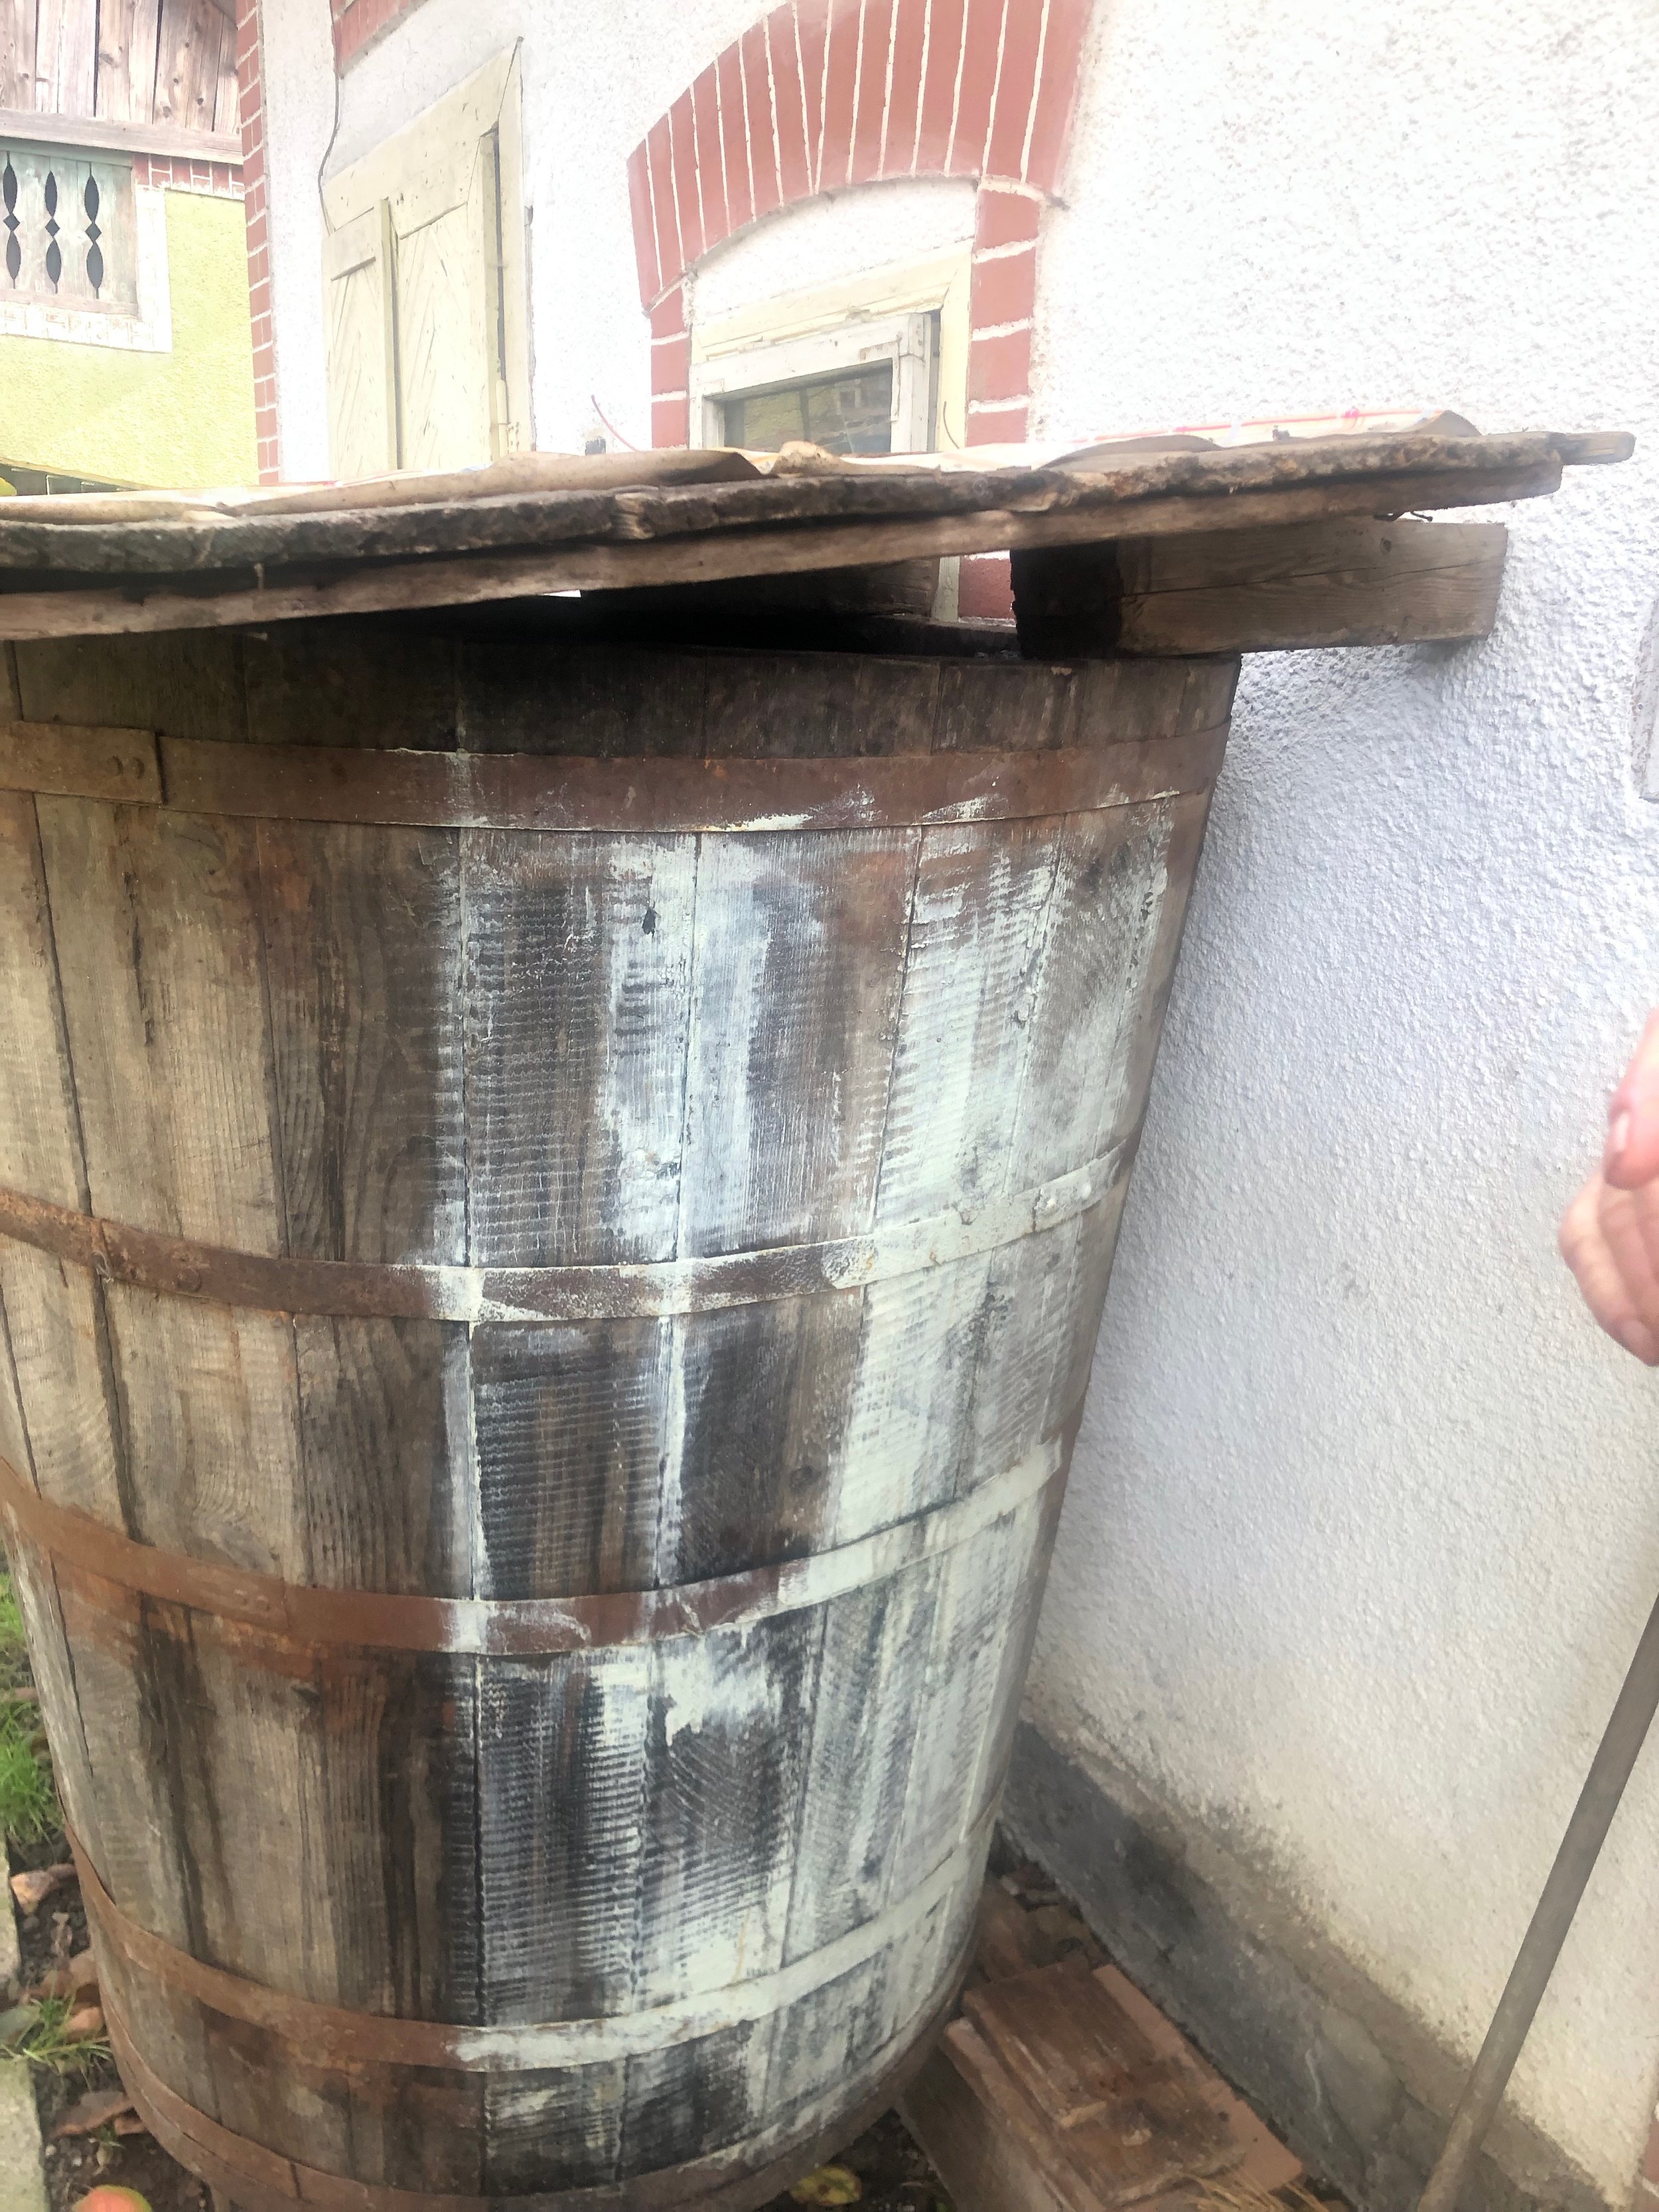  A giant barrel of fermenting plums to make pálinka 